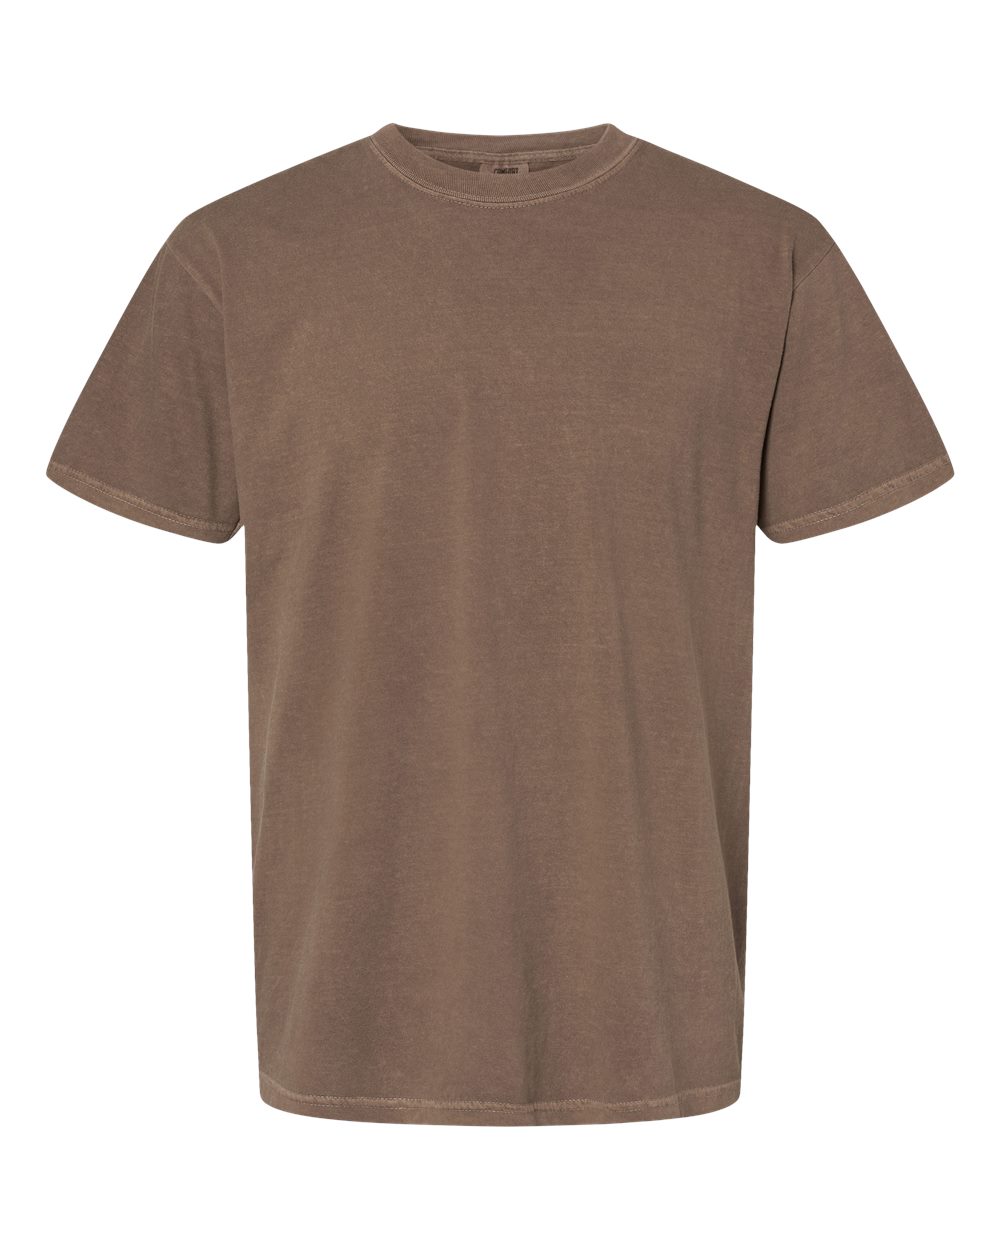 Comfort Colors Garment-Dyed Tee (1717) in Espresso